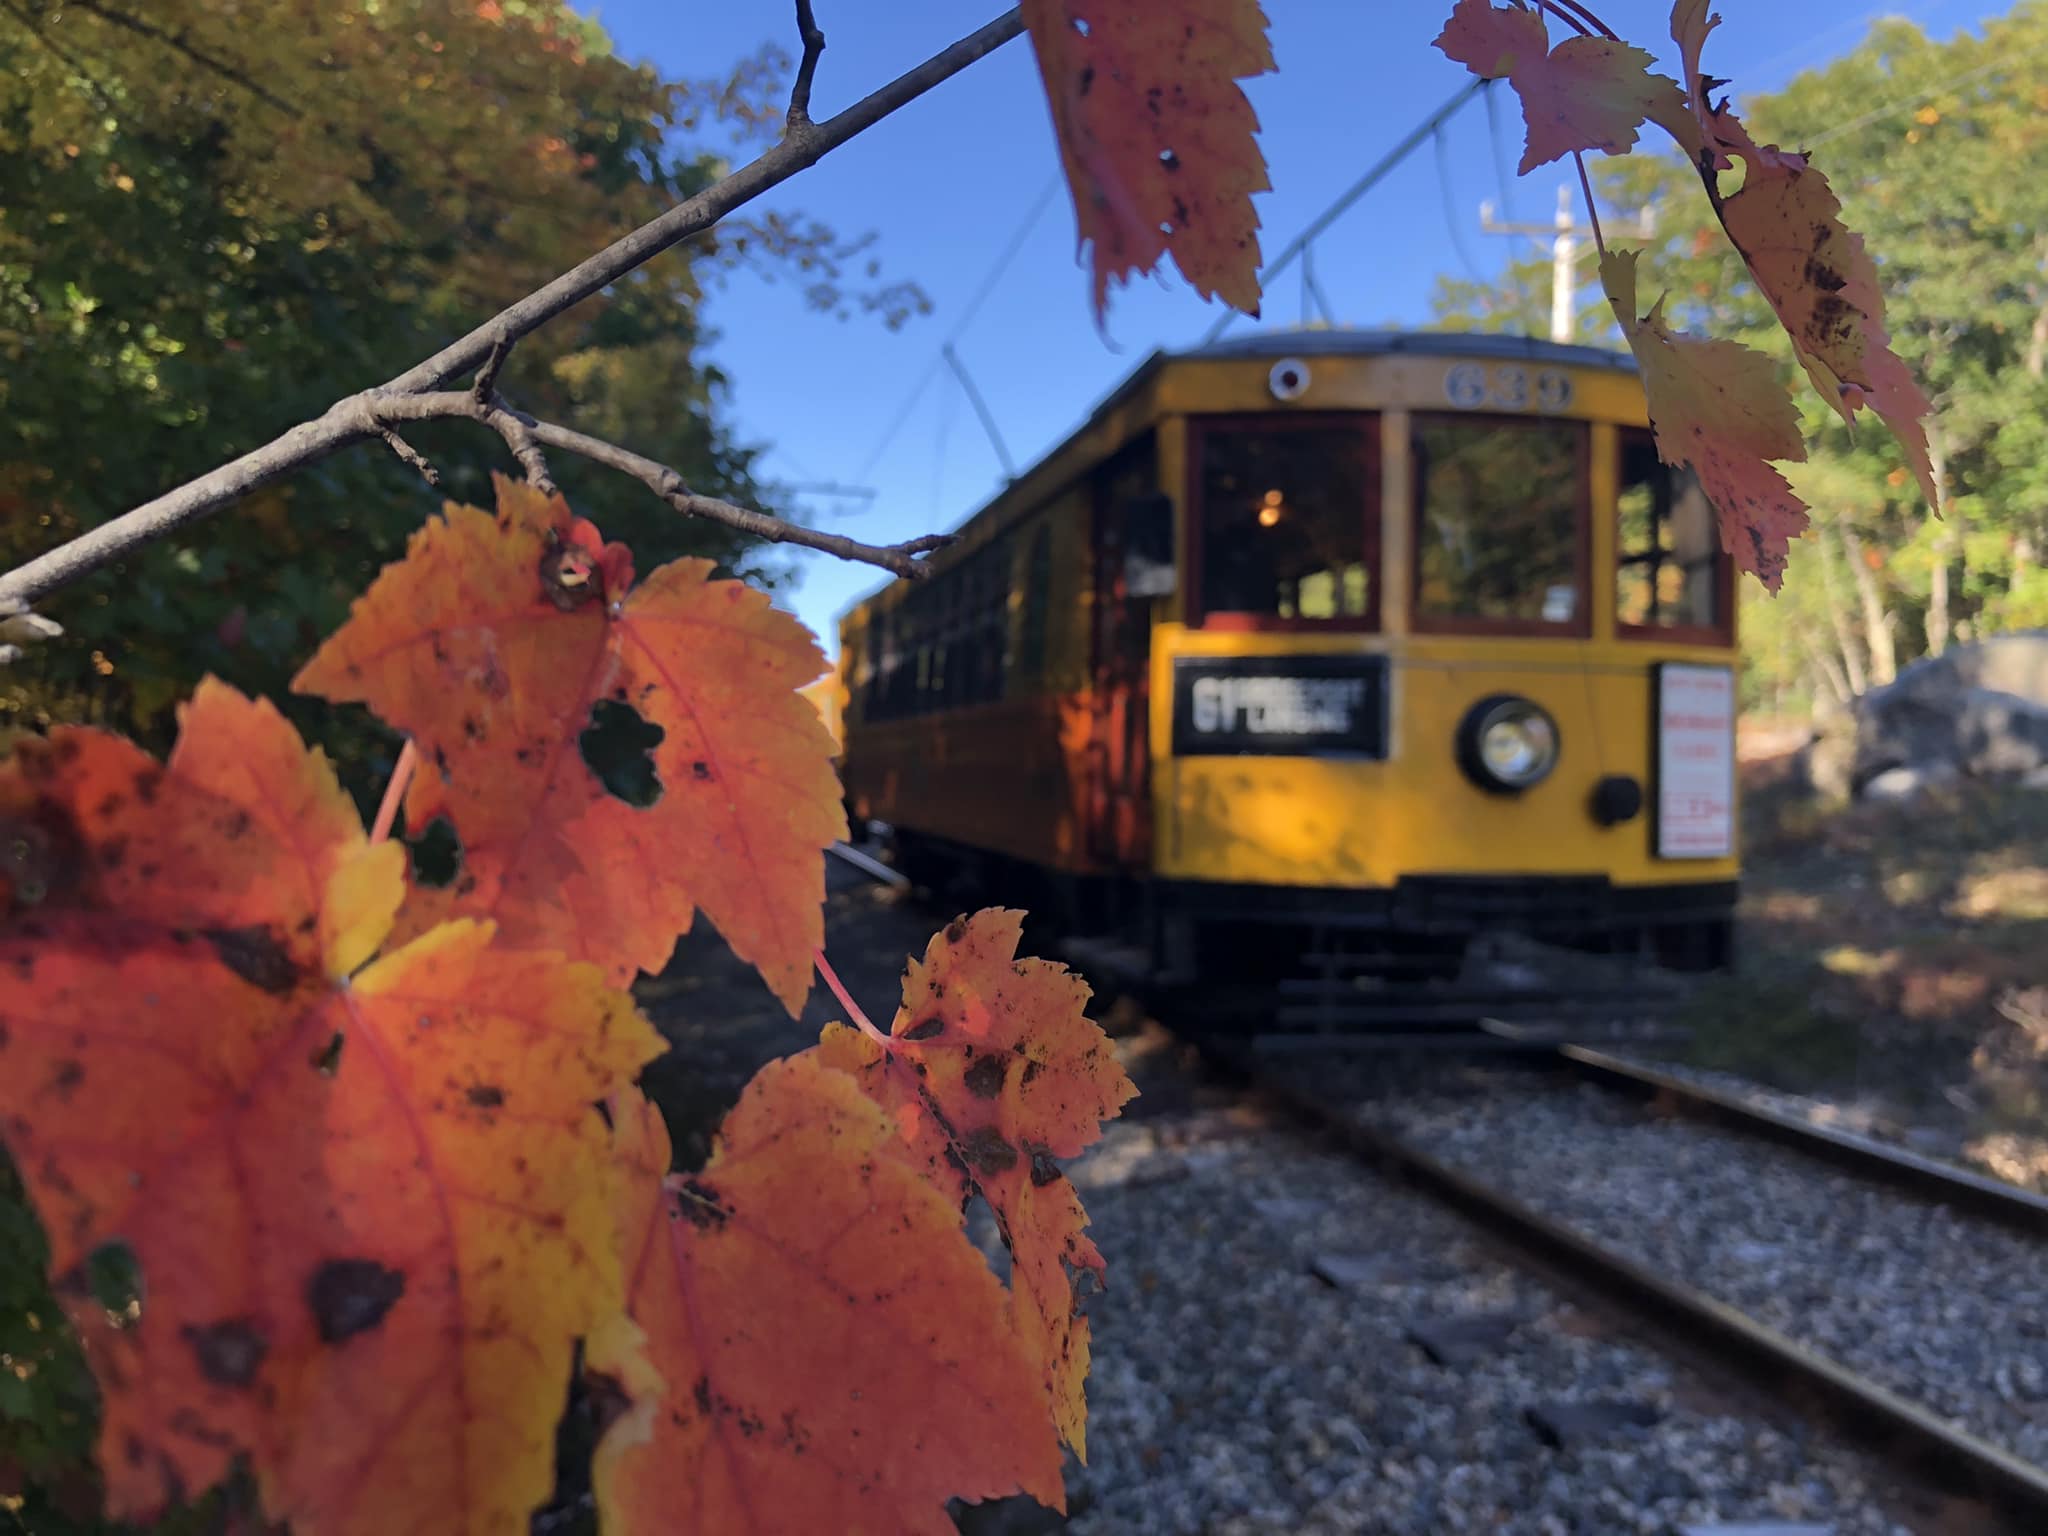 Pumpkin Patch Trolley Rides at the Seashore Trolley Museum